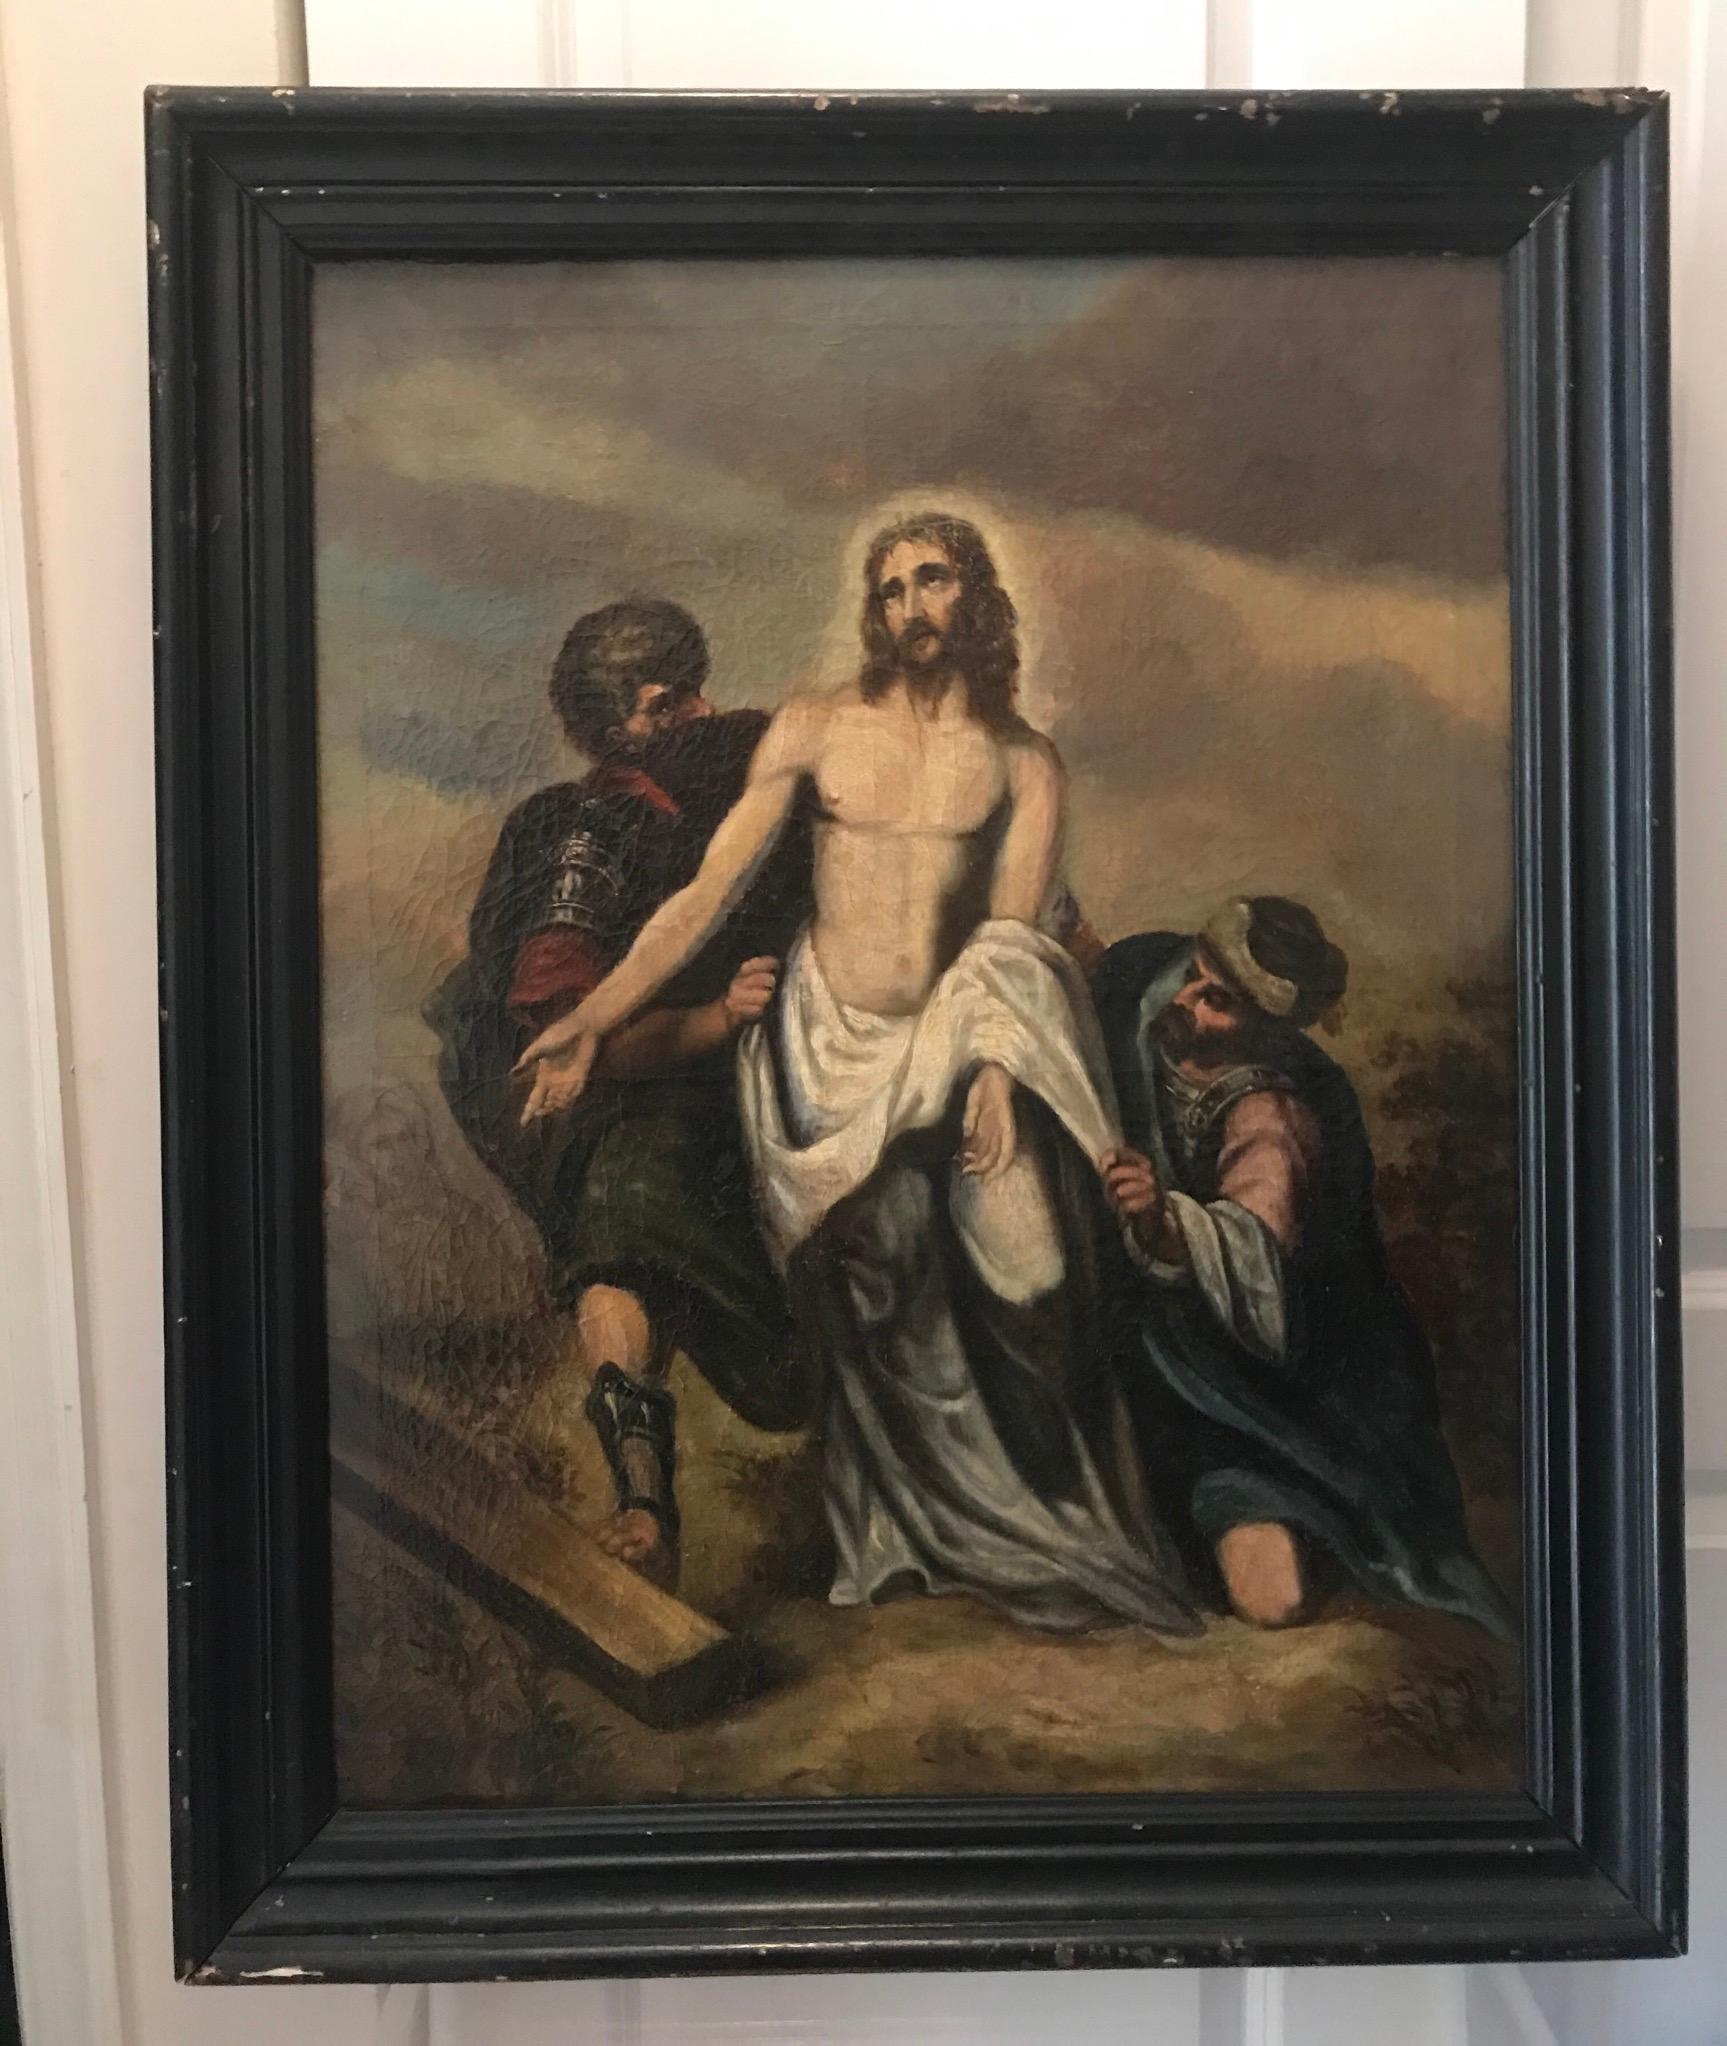 19th century religious painting, oil on canvas, Jesus Christ. In original frame.